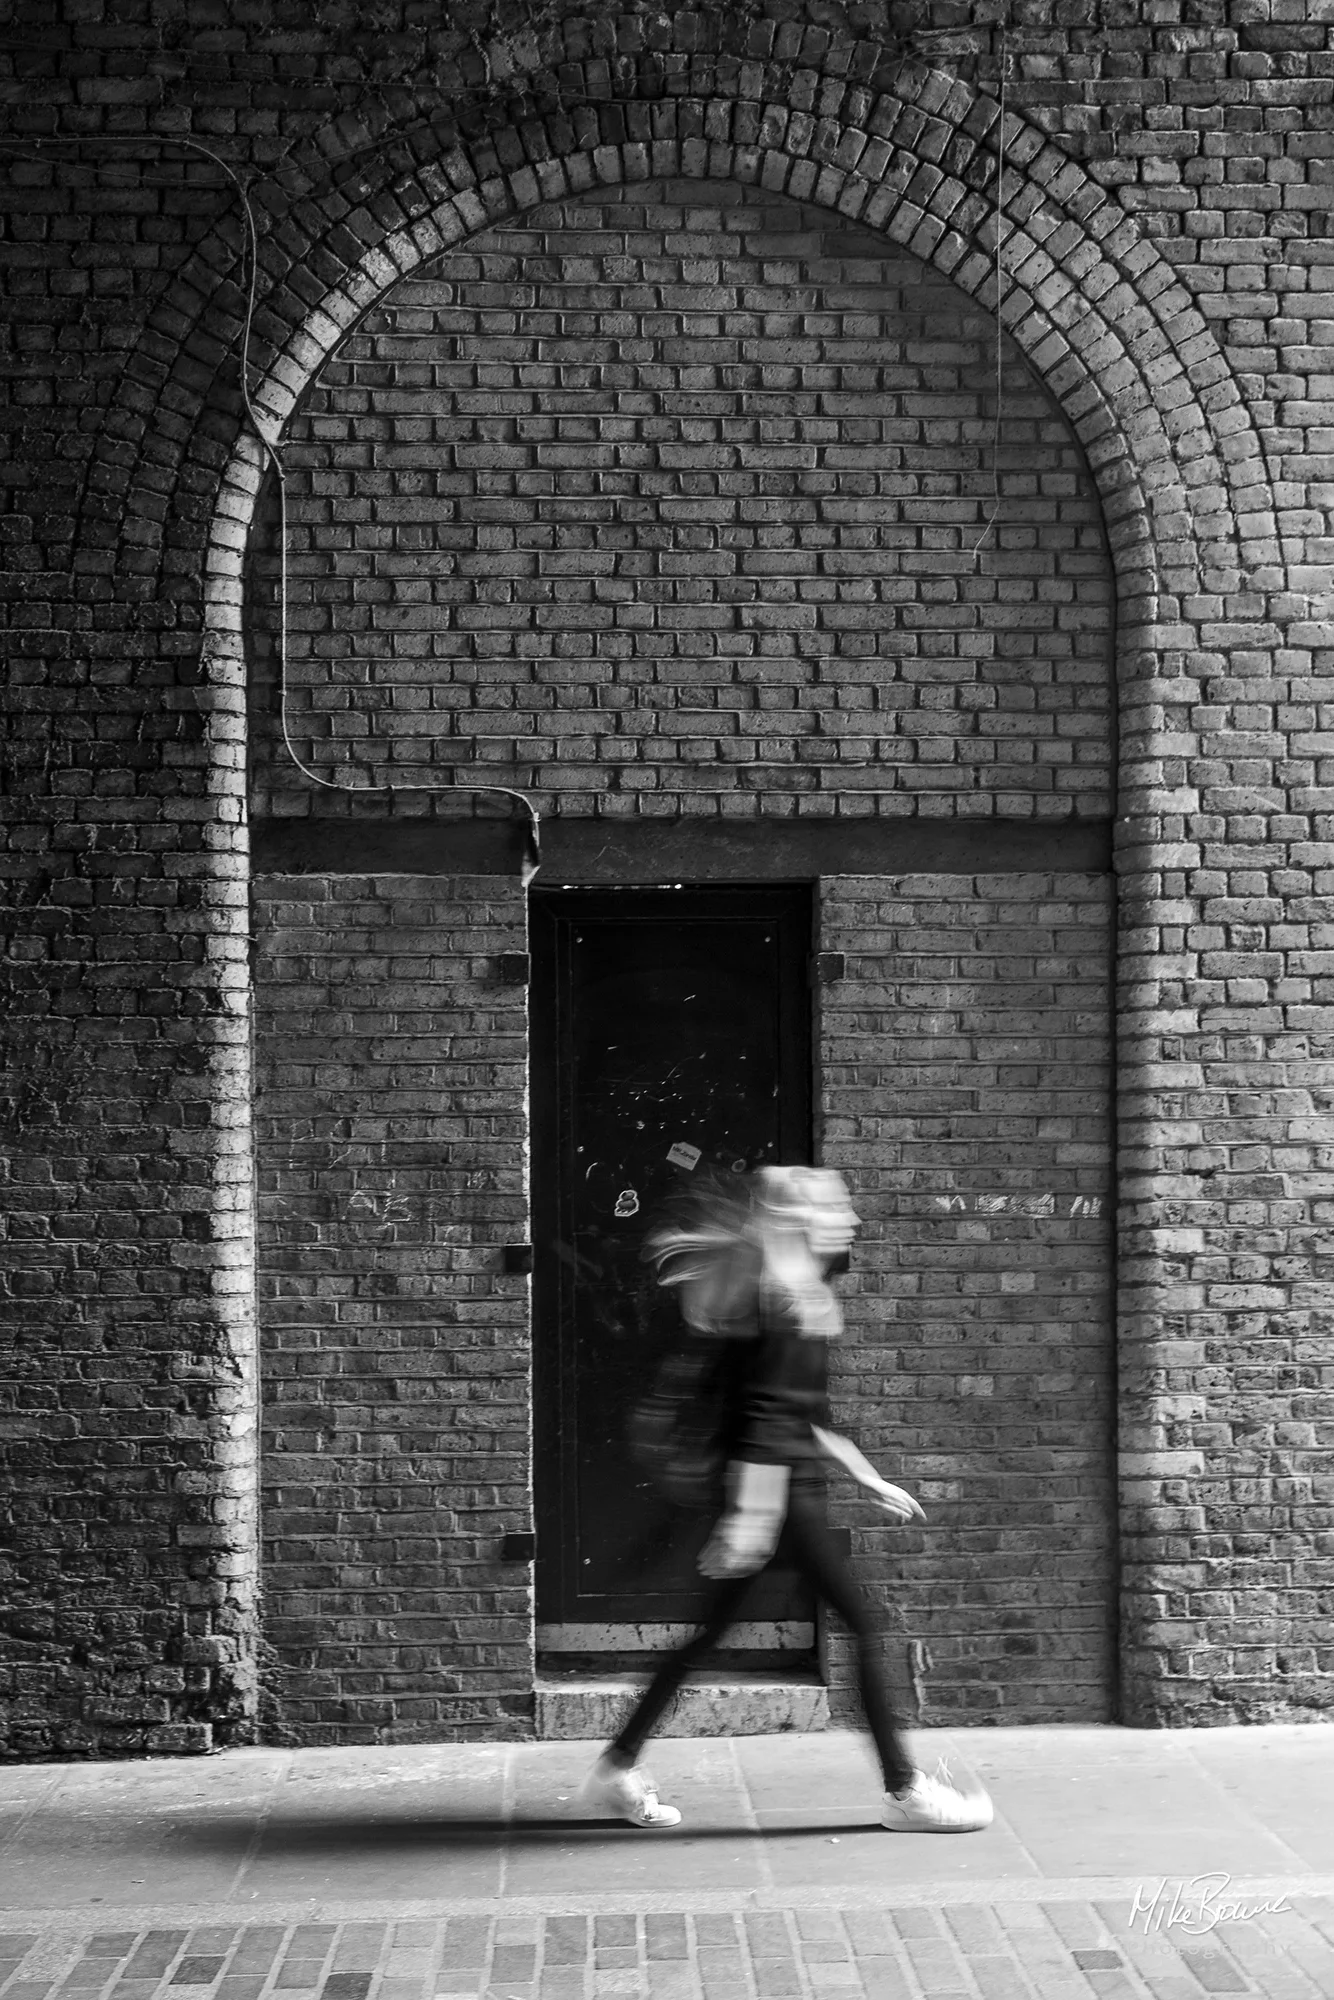 Tall ornate brick arched door way with girl walking in front toward the right